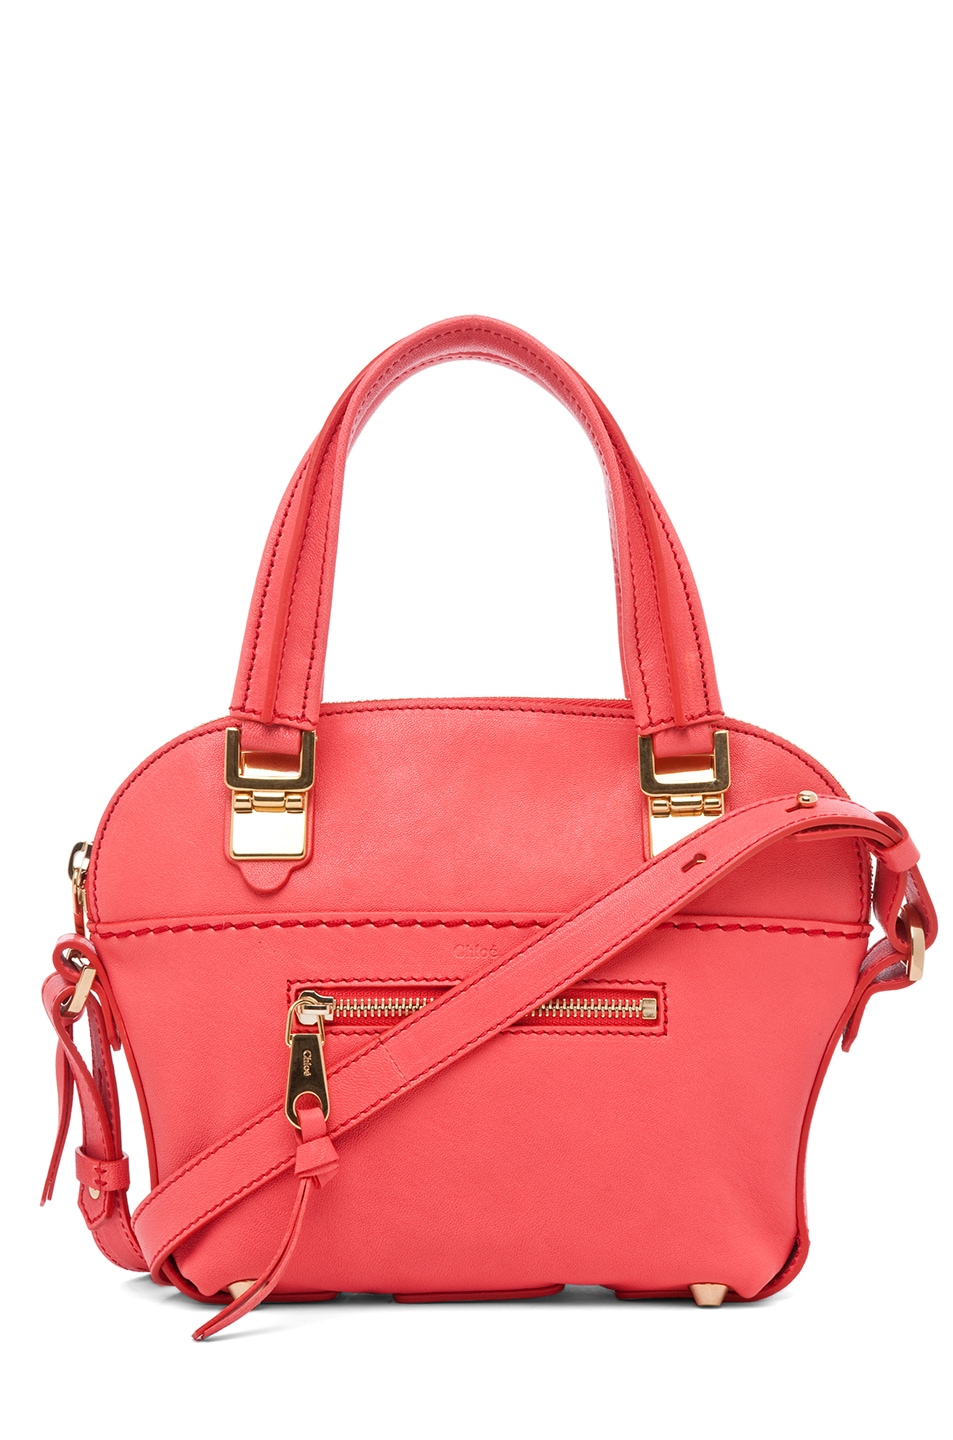 Image 1 of Chloe Angie Small Leather Handbag with Strap in Paradise Pink